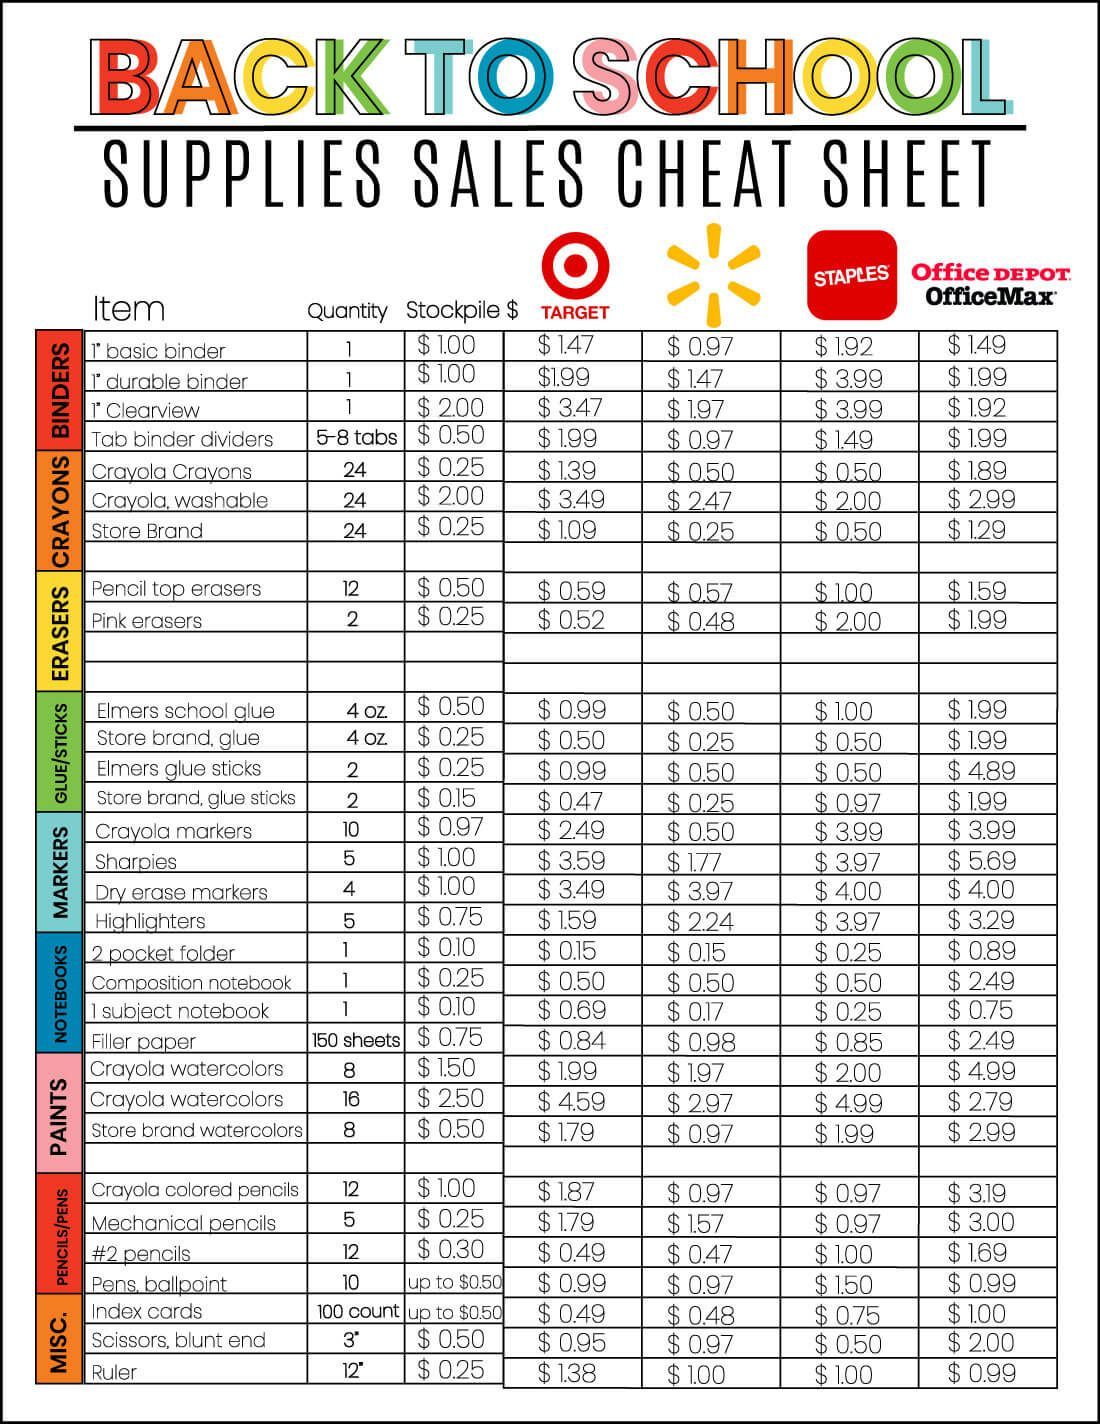 Back to School Supplies Cheat Sheet - Back to School Supplies Cheat Sheet -   18 diy School Supplies for 6th grade ideas